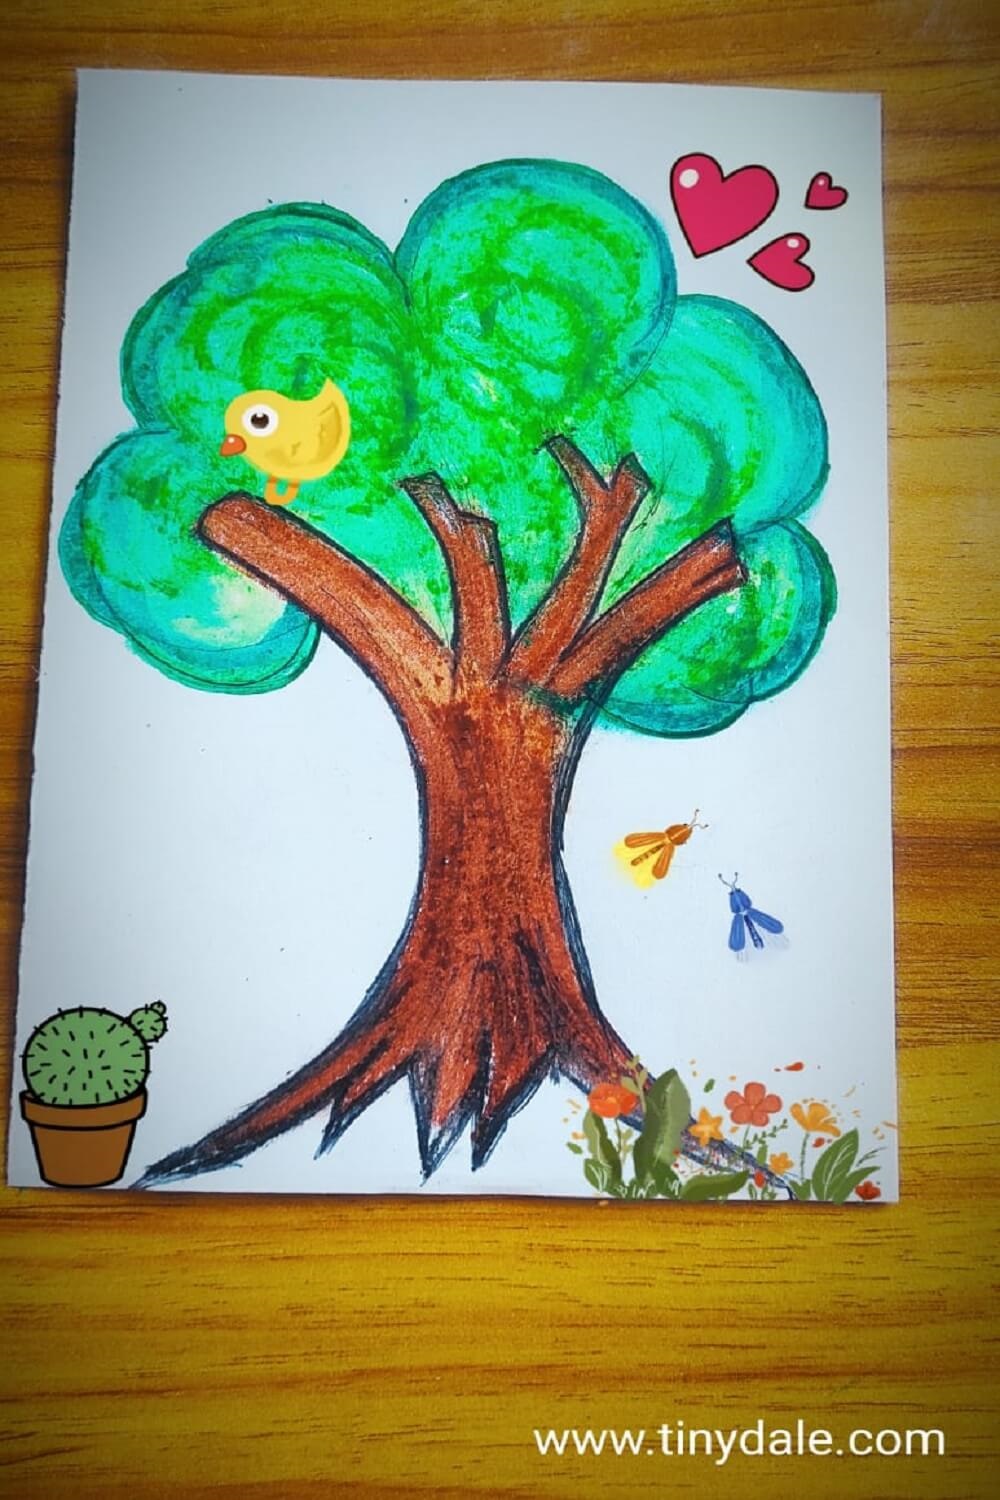 how to draw a tree for kids